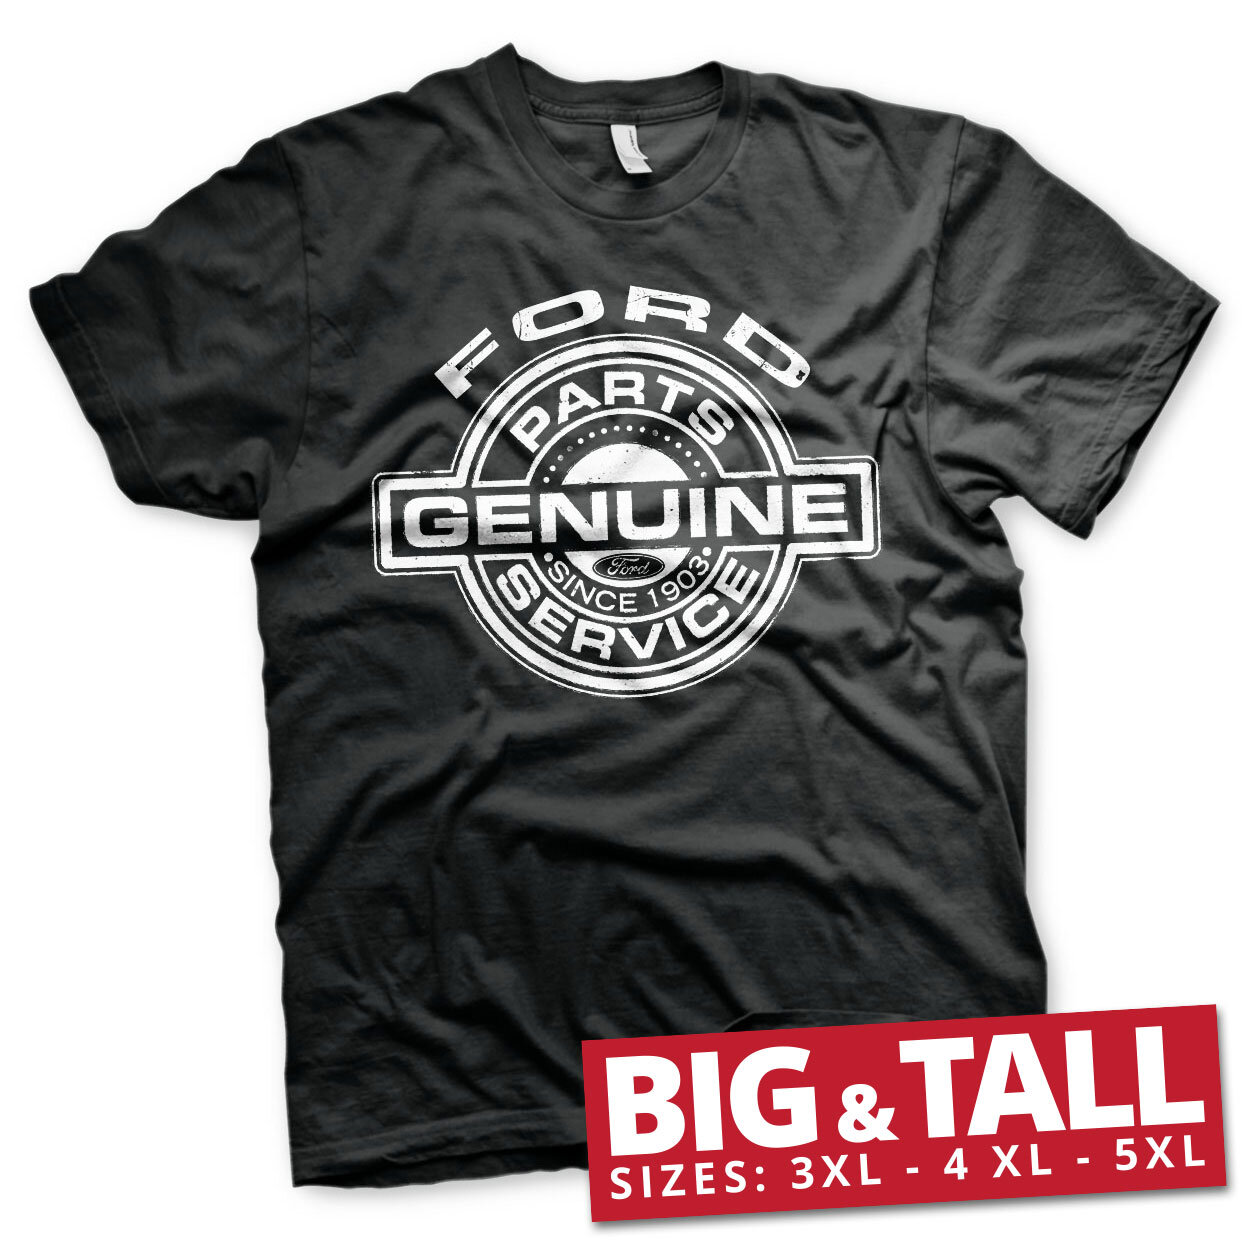 Ford - Genuine Parts And Service Big & Tall T-Shirt